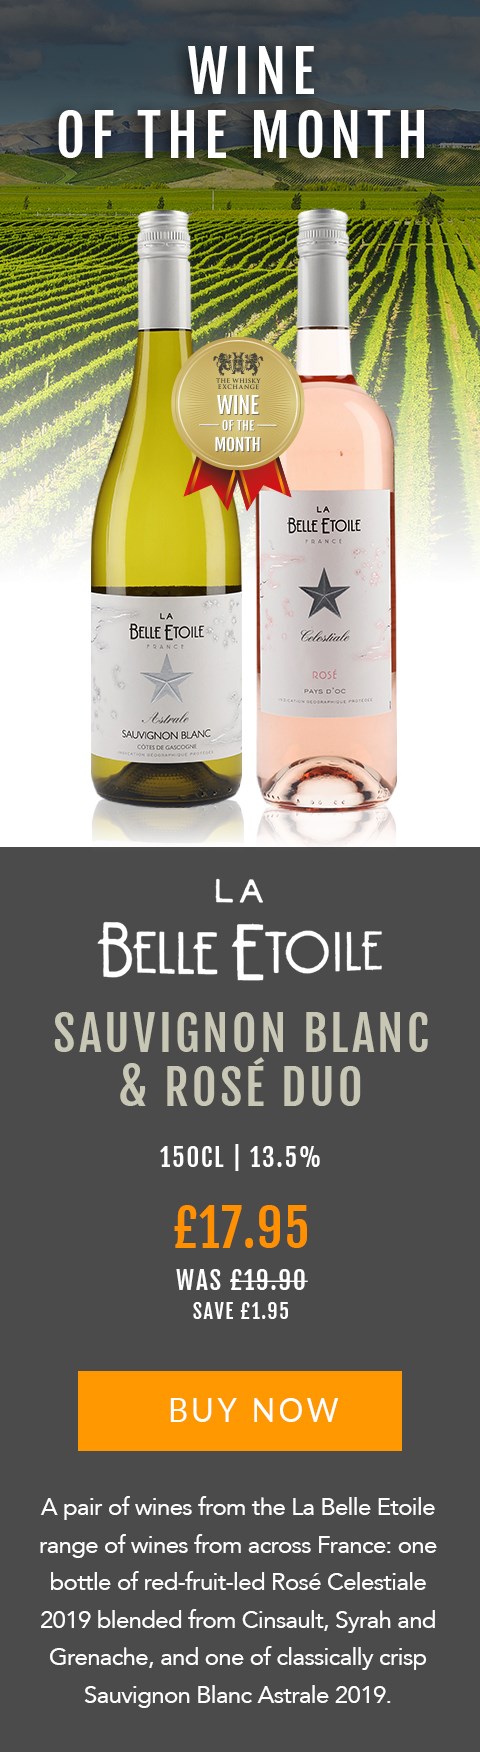 La Belle Etoile
Sauvignon Blanc & Rosé Duo
150cl | 13.5%

£17.95 (was £19.90) 
Save £1.95

BUY NOW> https://www.thewhiskyexchange.com/feature/wineofthemonth

A pair of wines from the La Belle Etoile range of wines from across France: one bottle of red-fruit-led Rosé Celestiale 2019 blended from Cinsault, Syrah and Grenache, and one of classically crisp Sauvignon Blanc Astrale 2019.